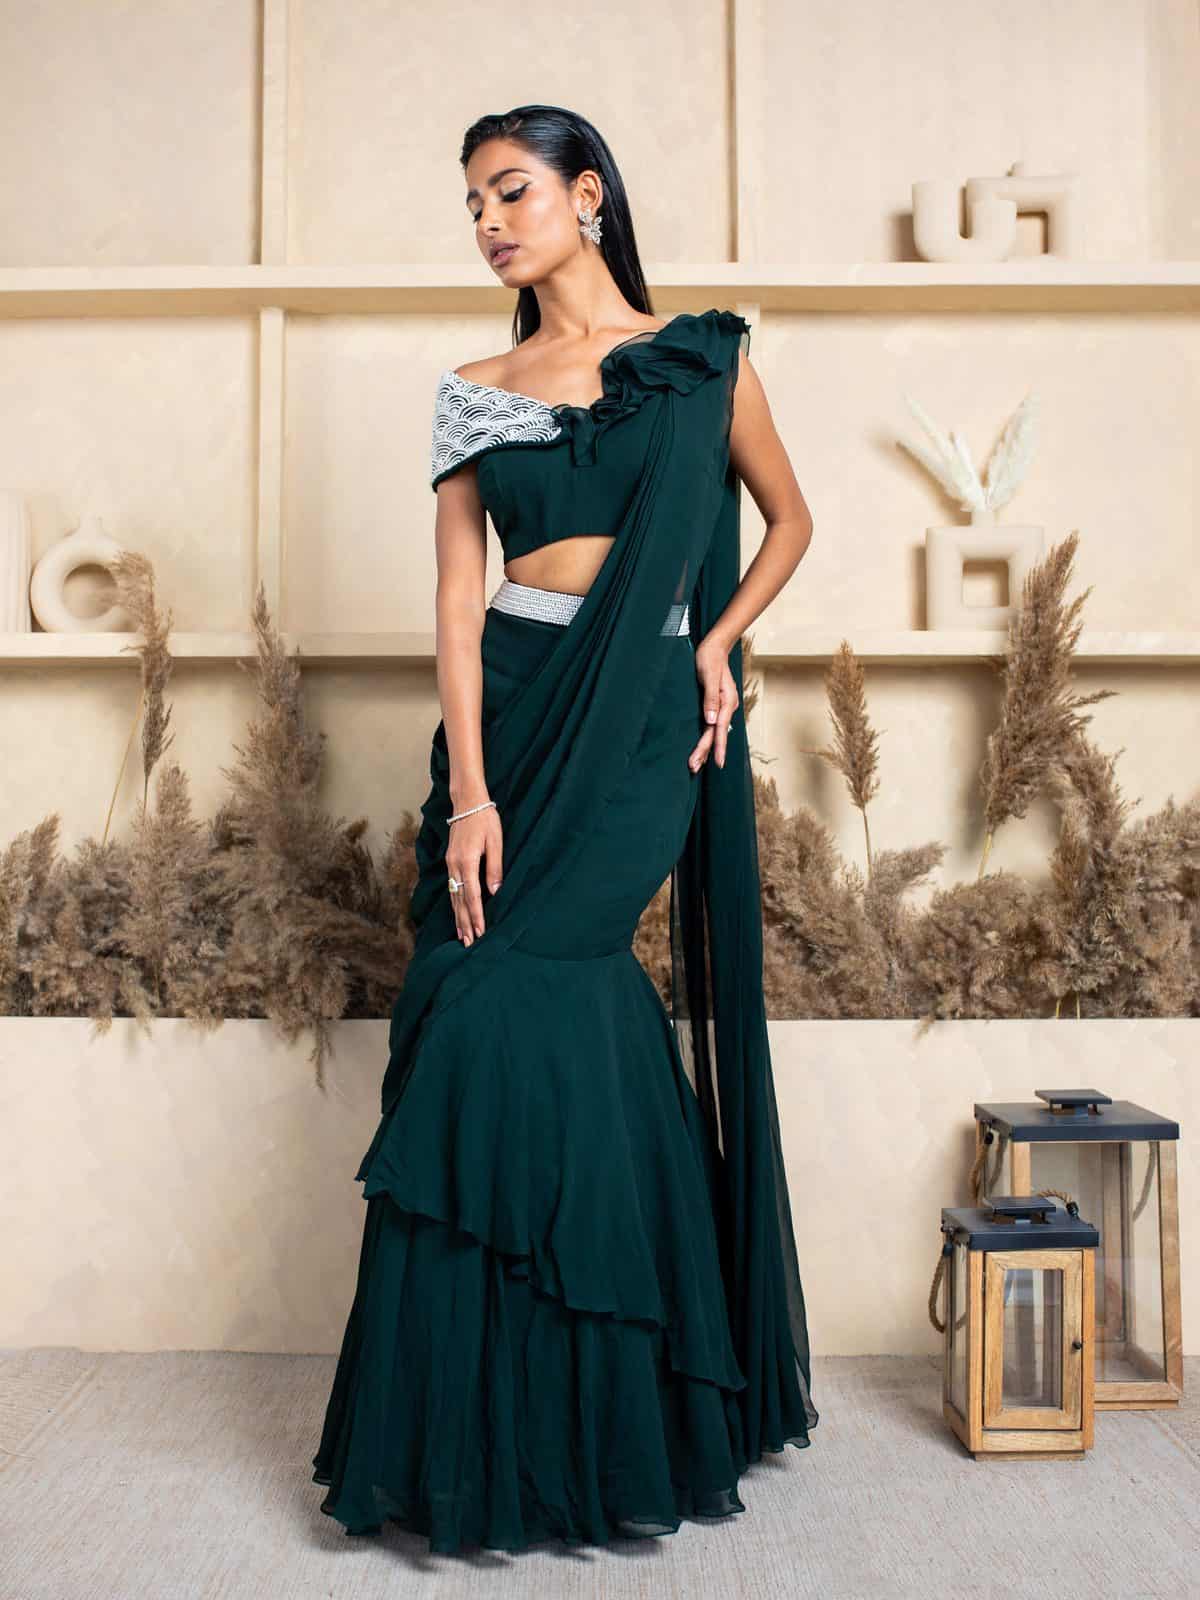 Mehendi outfit -Fish Cut Drape Saree with a Pearl Belt